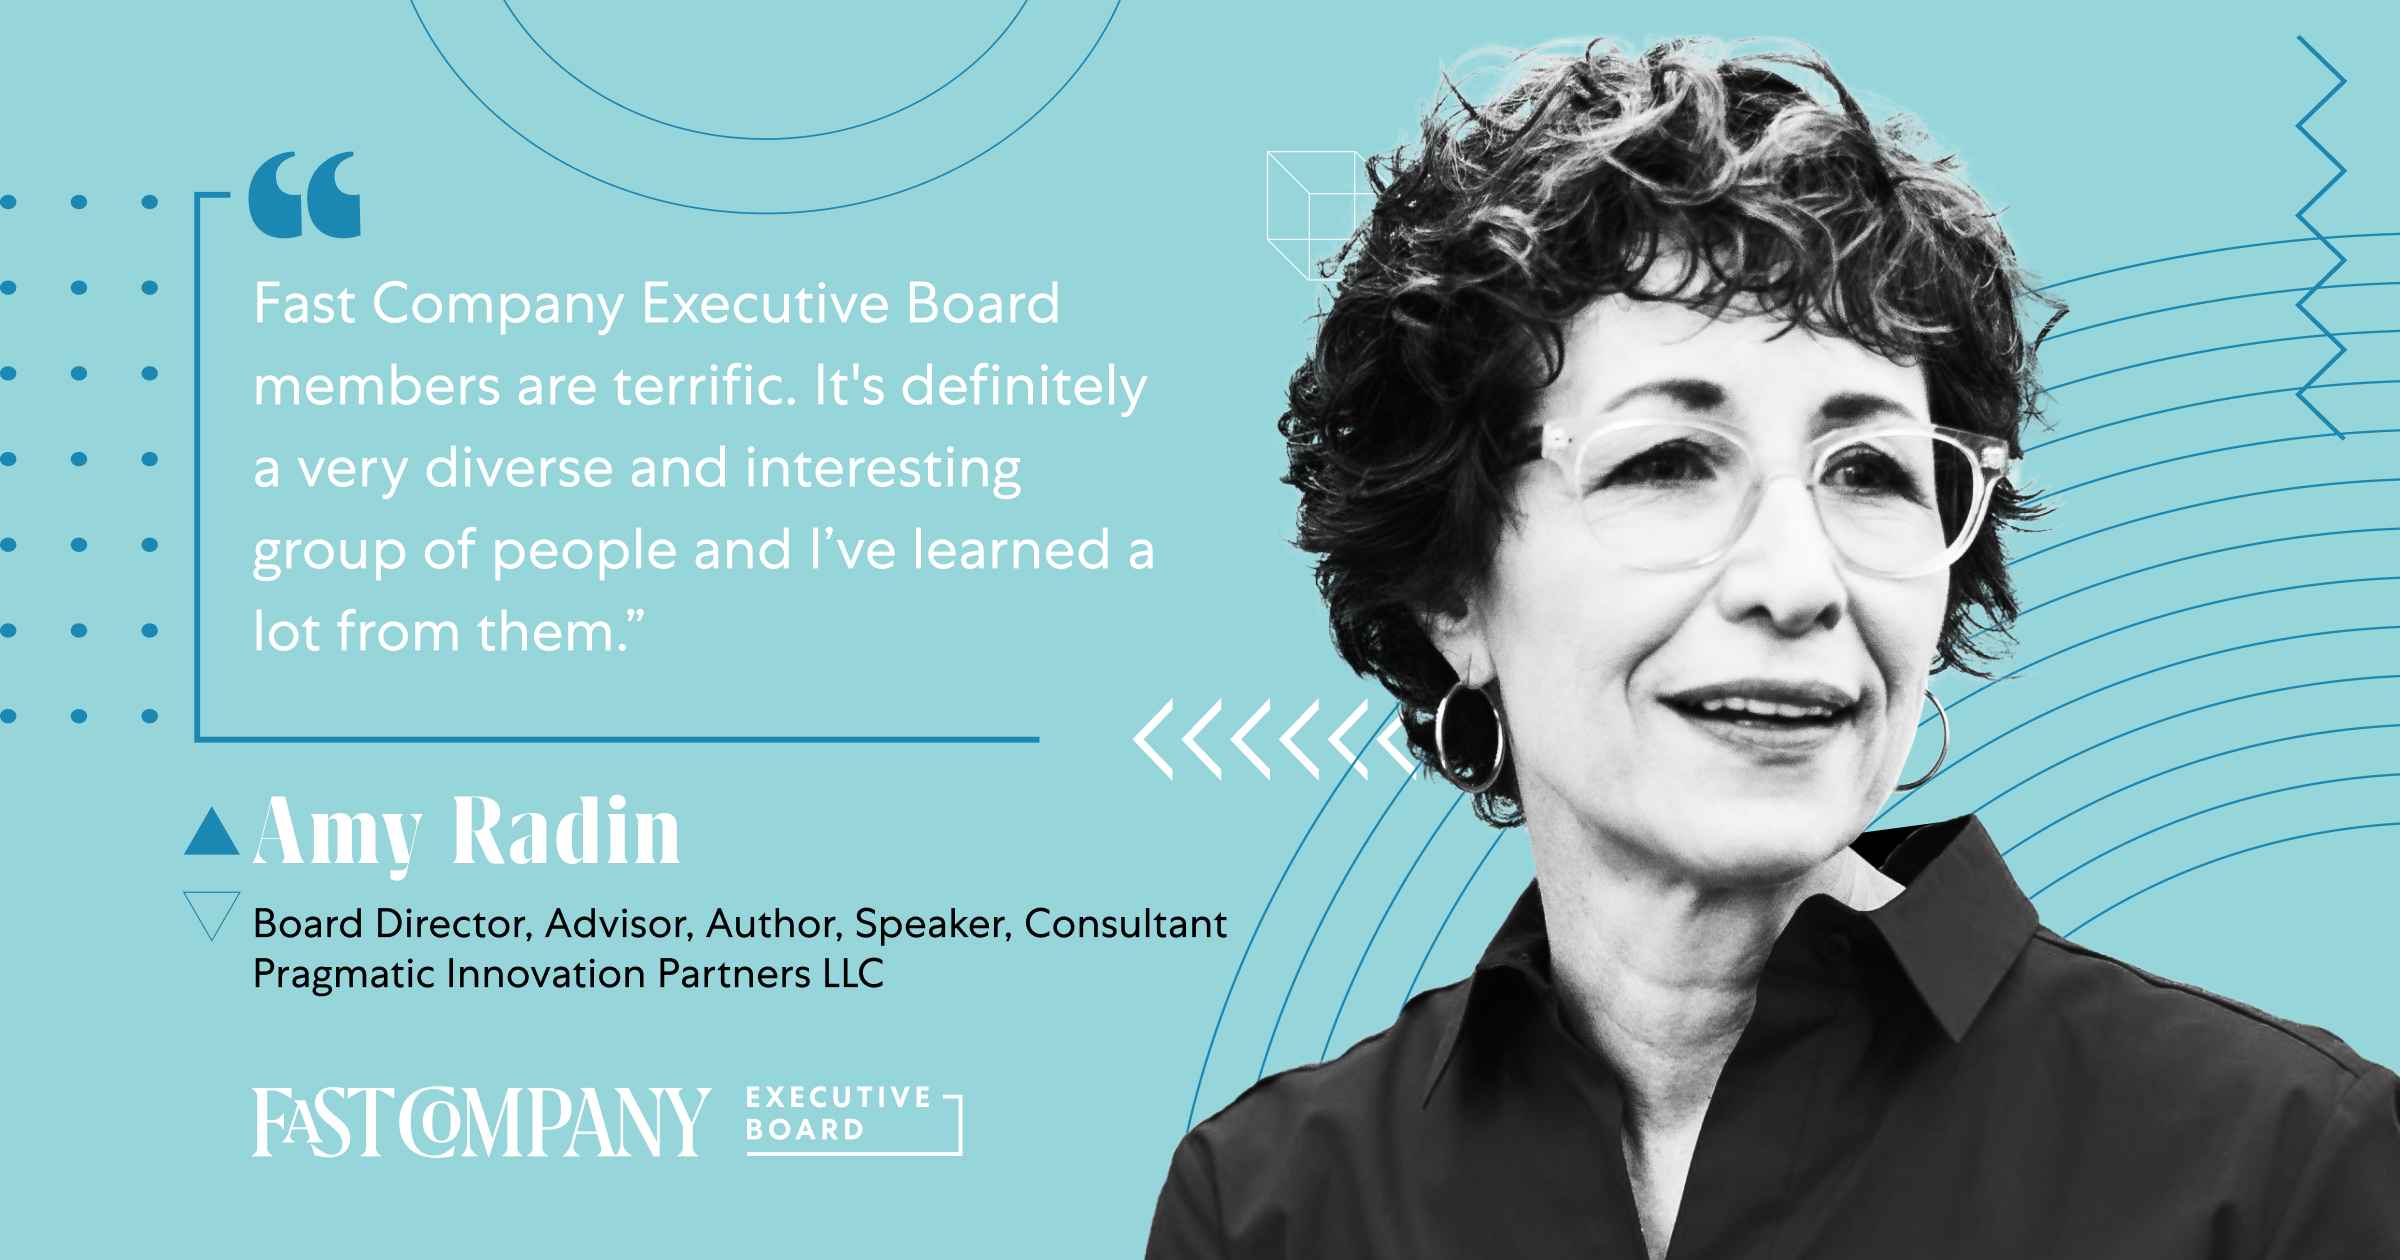 Through Fast Company Executive Board, Amy Radin Shares Her Expertise on Innovation and Leadership